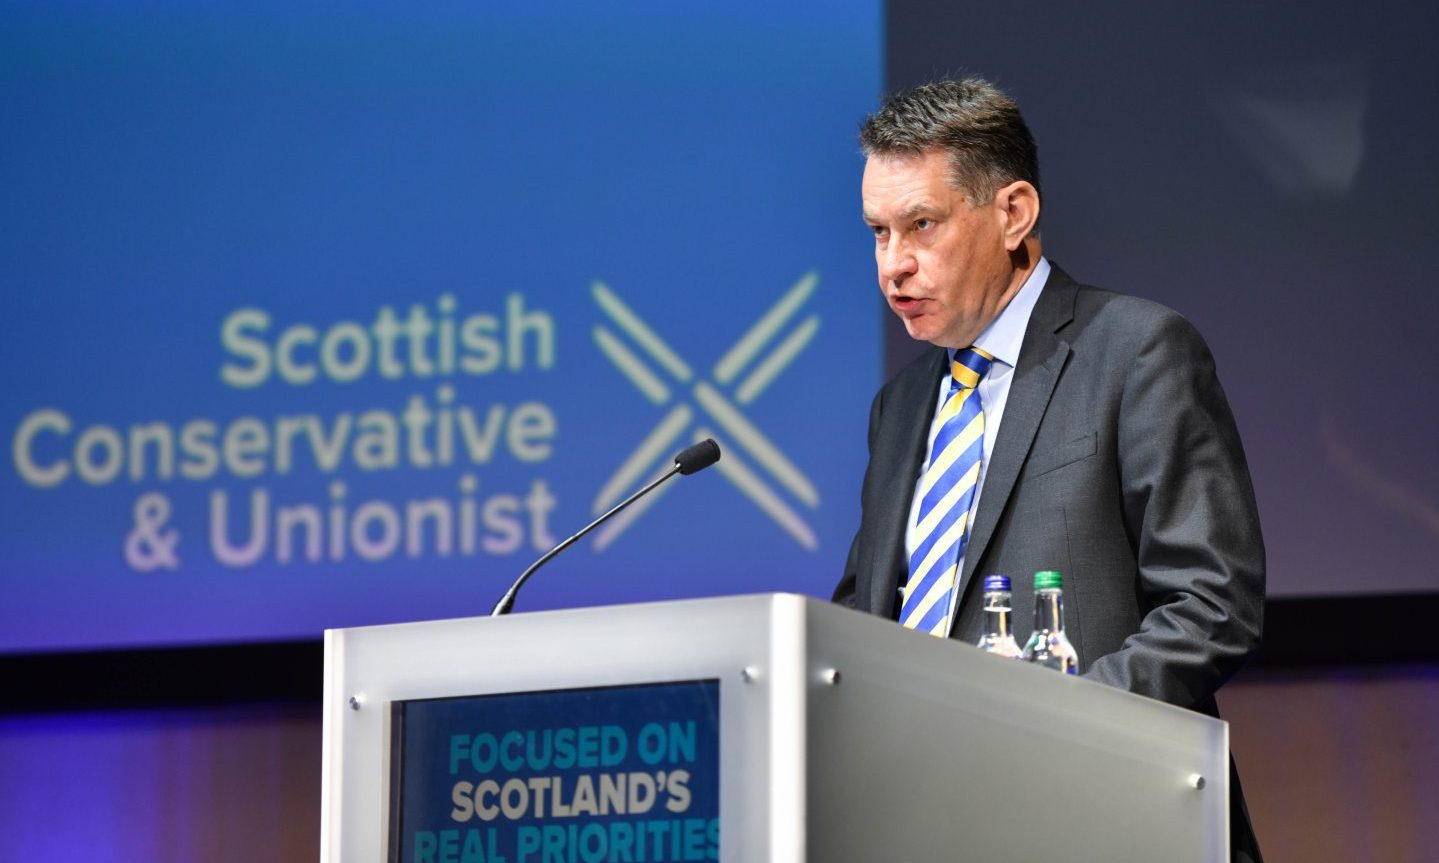 Perthshire Scottish Conservative MSP Murdo Fraser stands at a lectern